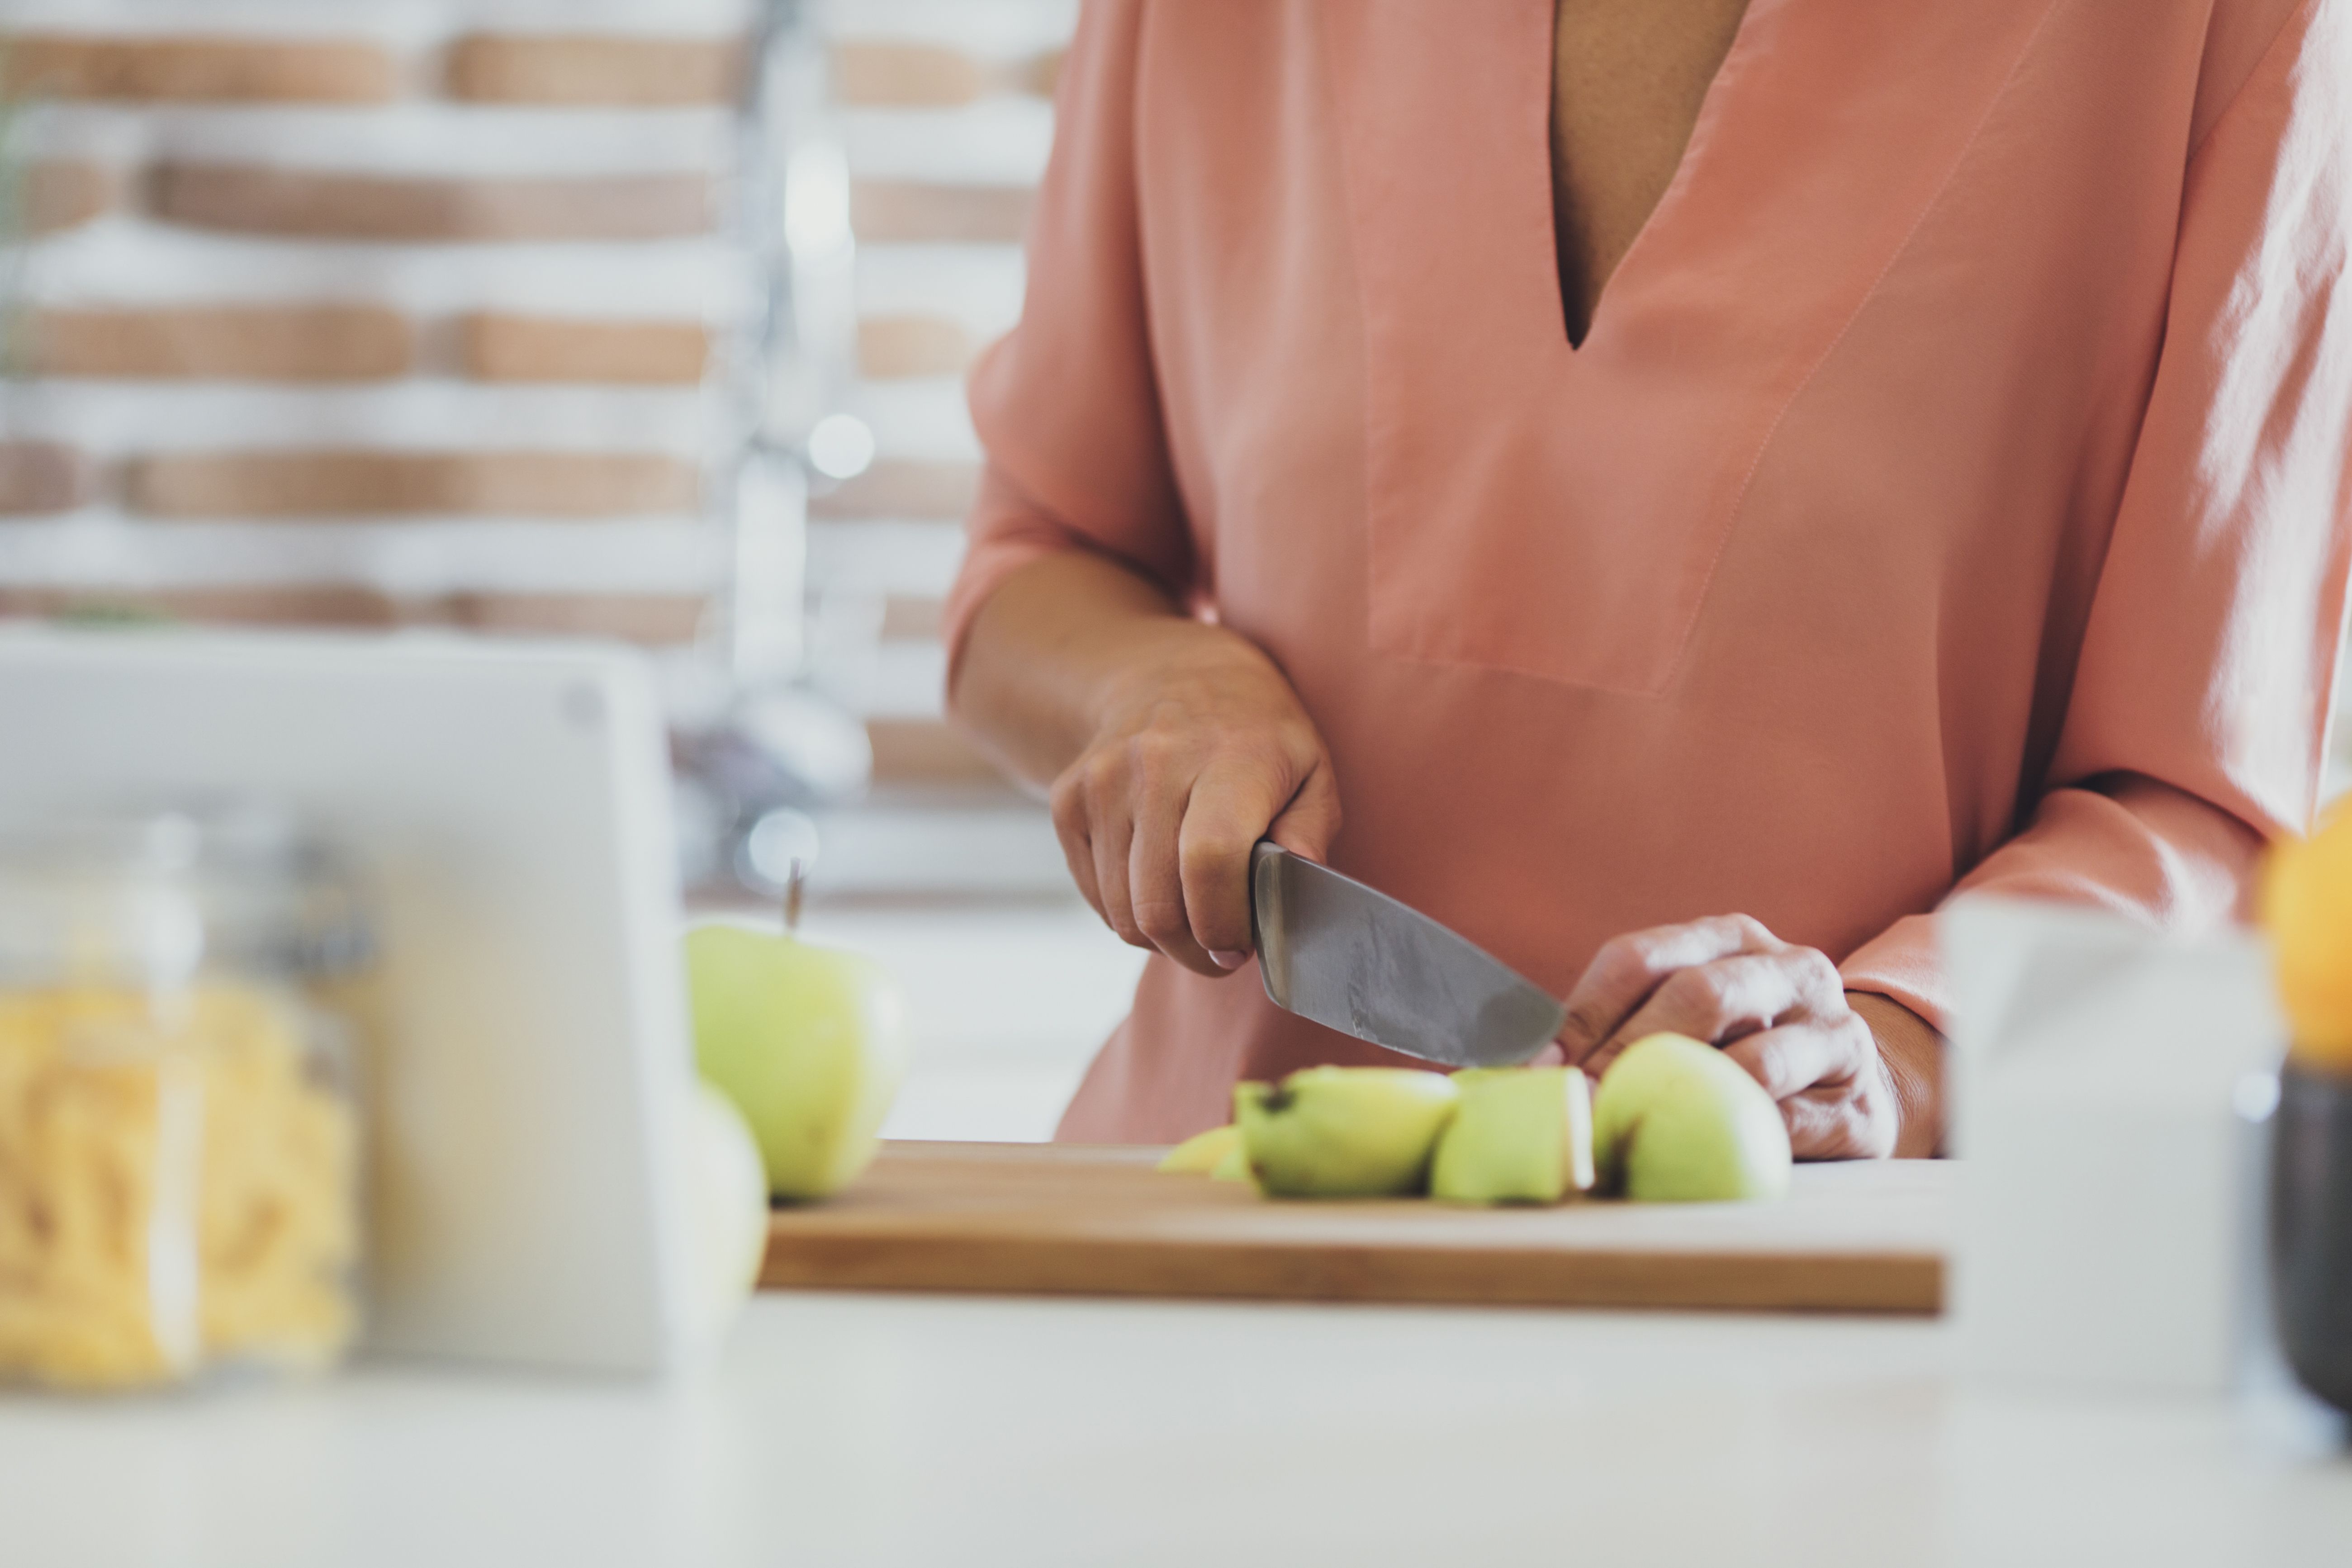 https://hips.hearstapps.com/hmg-prod/images/older-caucasian-woman-cutting-apples-in-kitchen-royalty-free-image-605763063-1541705762.jpg